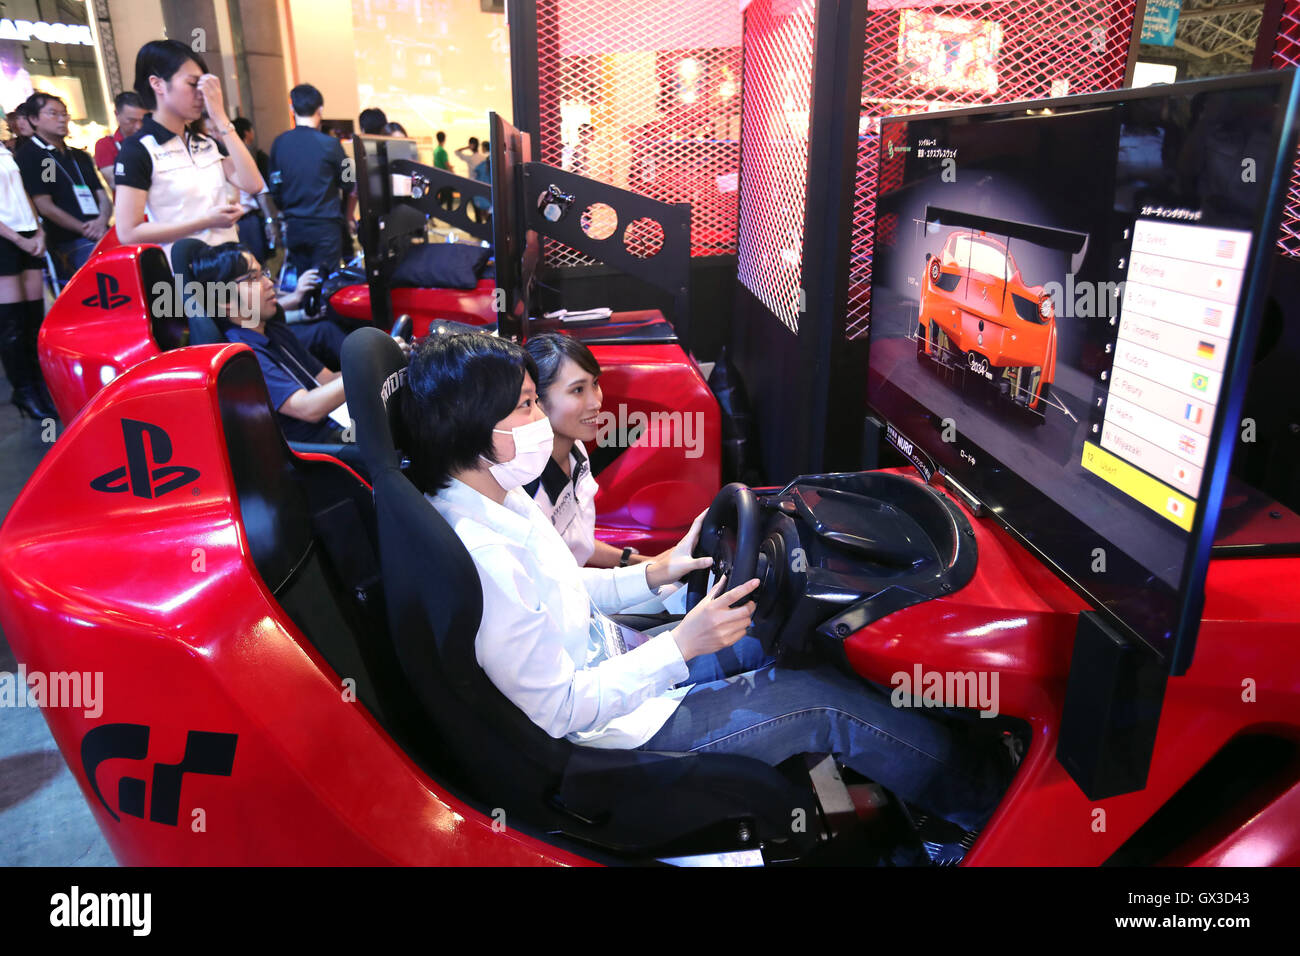 Thursday. 15th Sep, 2016. Visitors try to play videogames with Sony Interactive Entertainment's PlayStation 4 at the annual Tokyo Game Show in Chiba, suburban Tokyo on Thursday, September 15, 2016. The 20th anniversary Show includes show a new Virtual Reality (VR) area. The event hosts 614 exhibitors from 37 different countries and runs from September 15 to 18 at the International Convention Complex Makuhari Messe in Chiba. 1,523 game titles for smartphones, games consoles, PC and VR platforms are on show. Credit:  Yoshio Tsunoda/AFLO/Alamy Live News Stock Photo